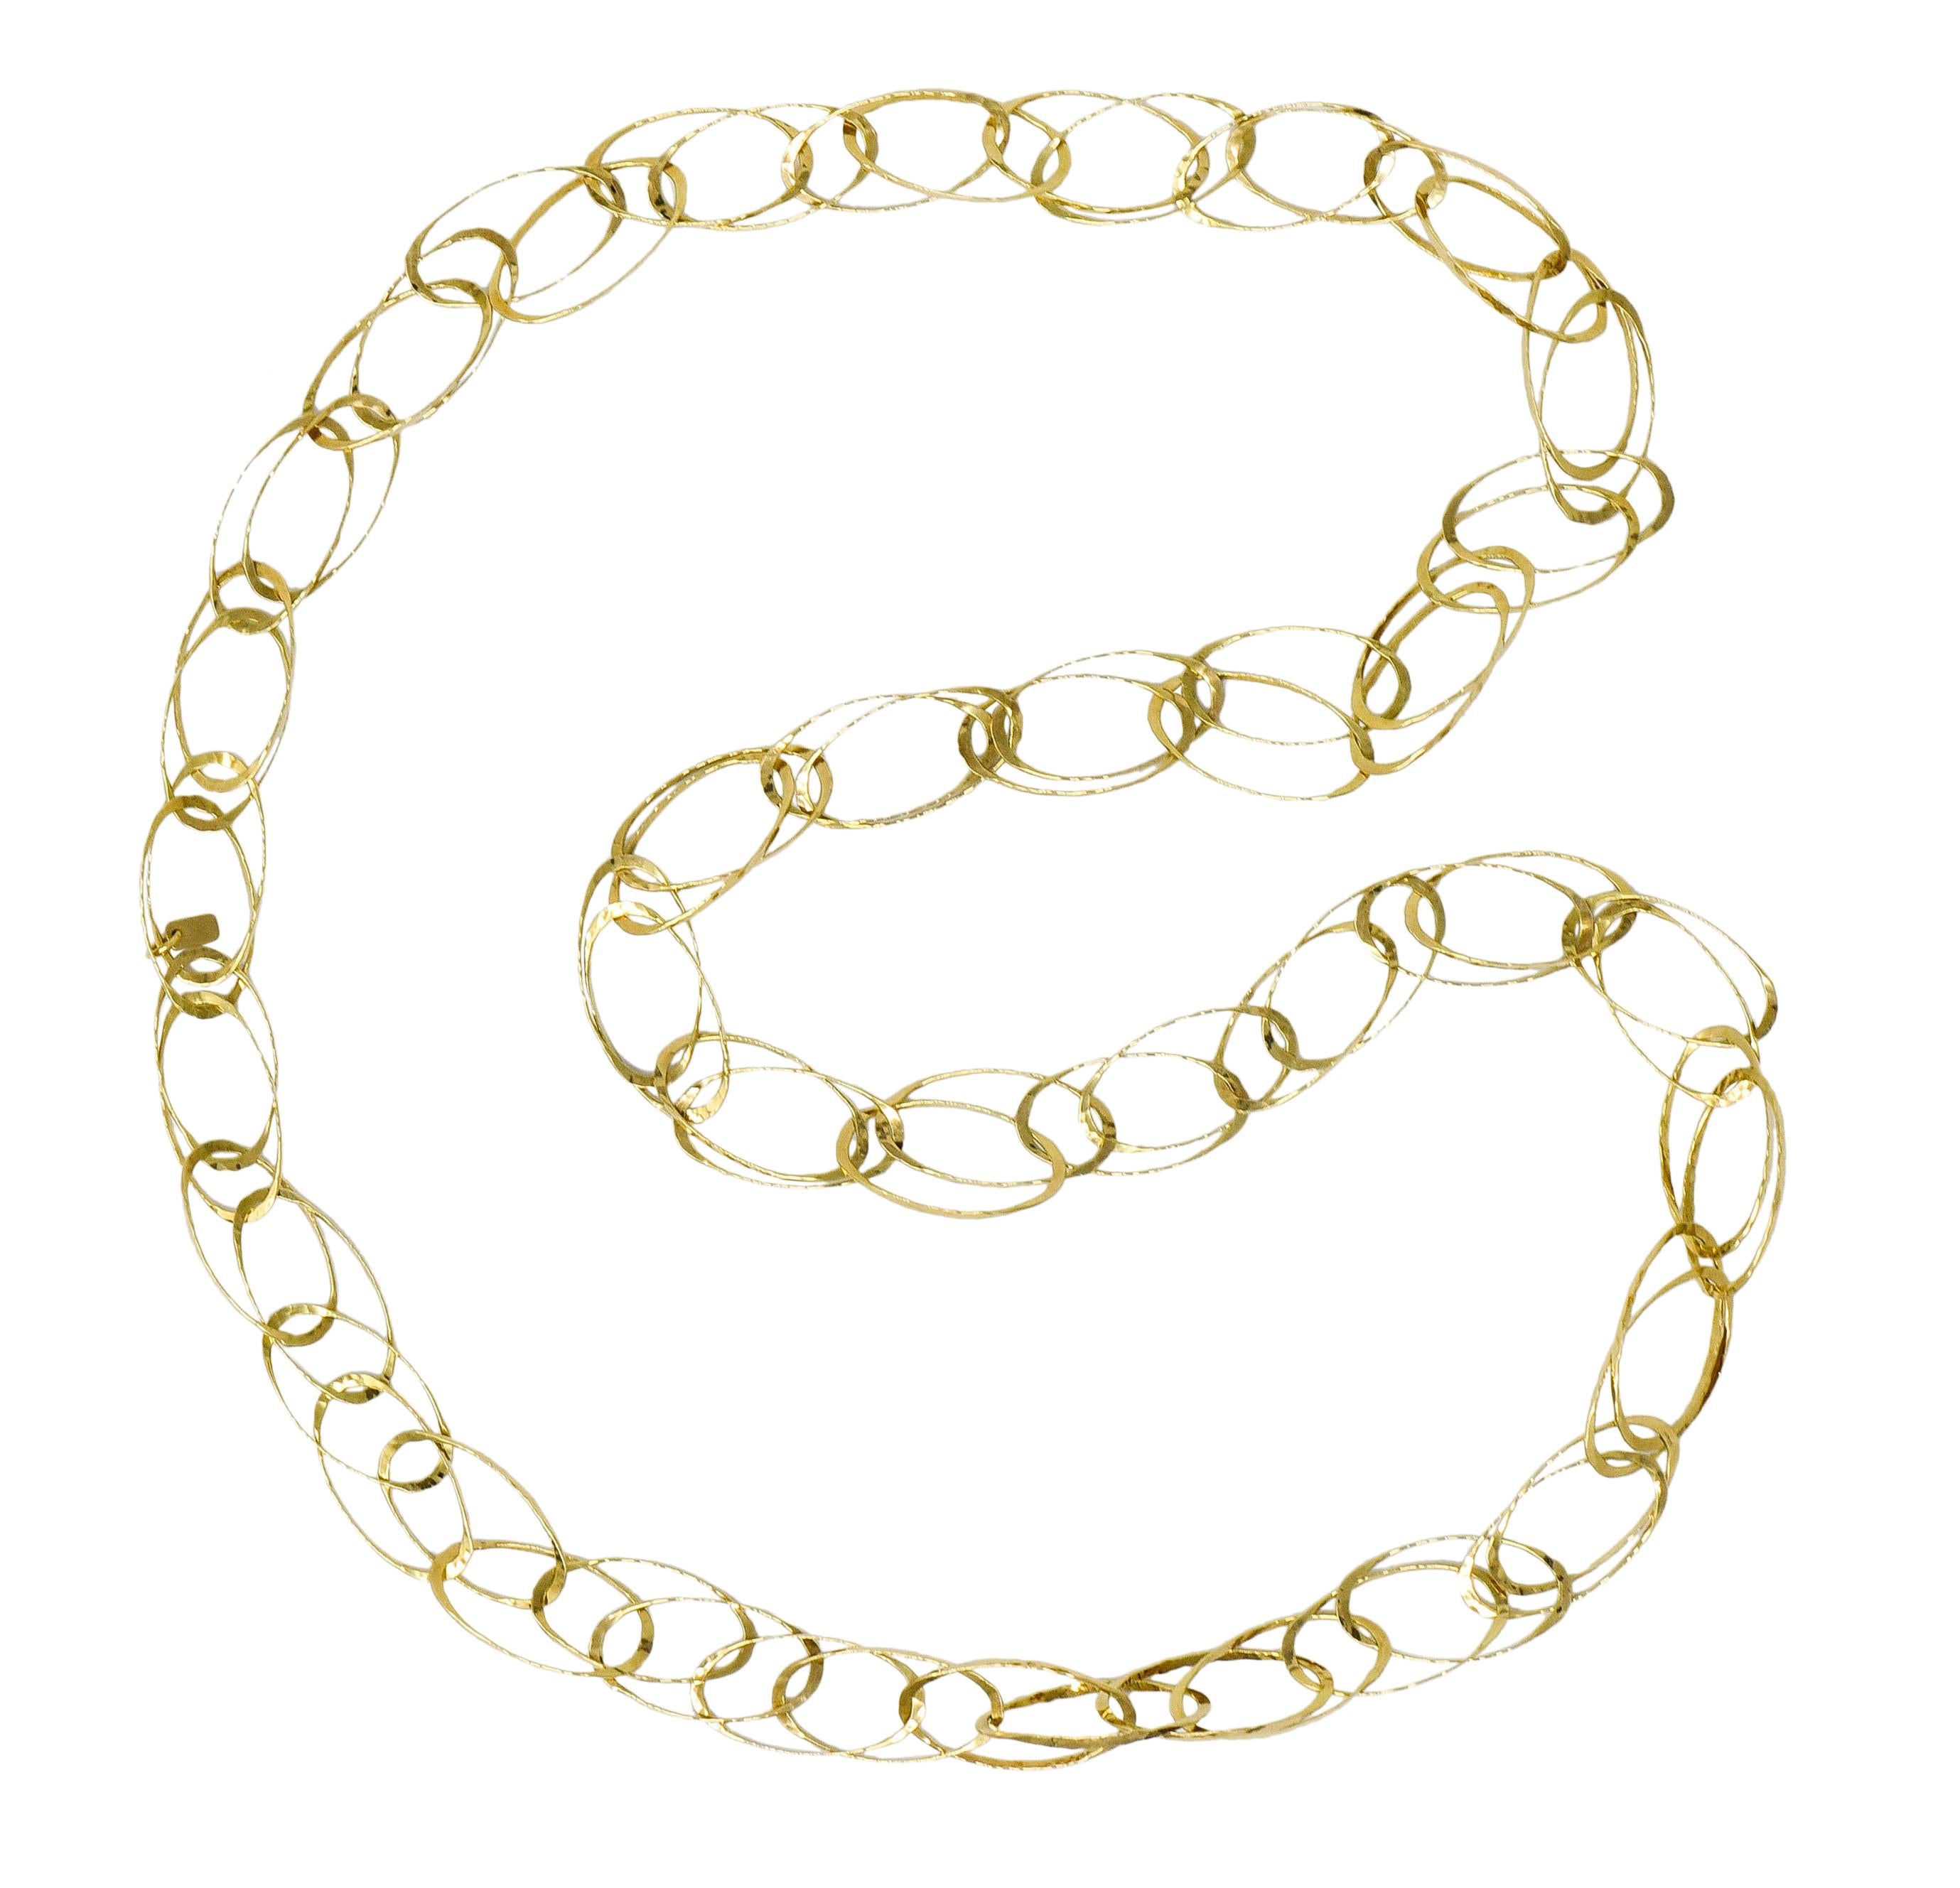 Necklace is designed as intersecting elongated oval links

Thin and with a hammered finish

Completed by logo link with maker's mark and stamped 18K for 18 karat gold

Circa: 2000s

Length: 34 inch (eternal loop)

Width at widest: 3/4 inch

Total